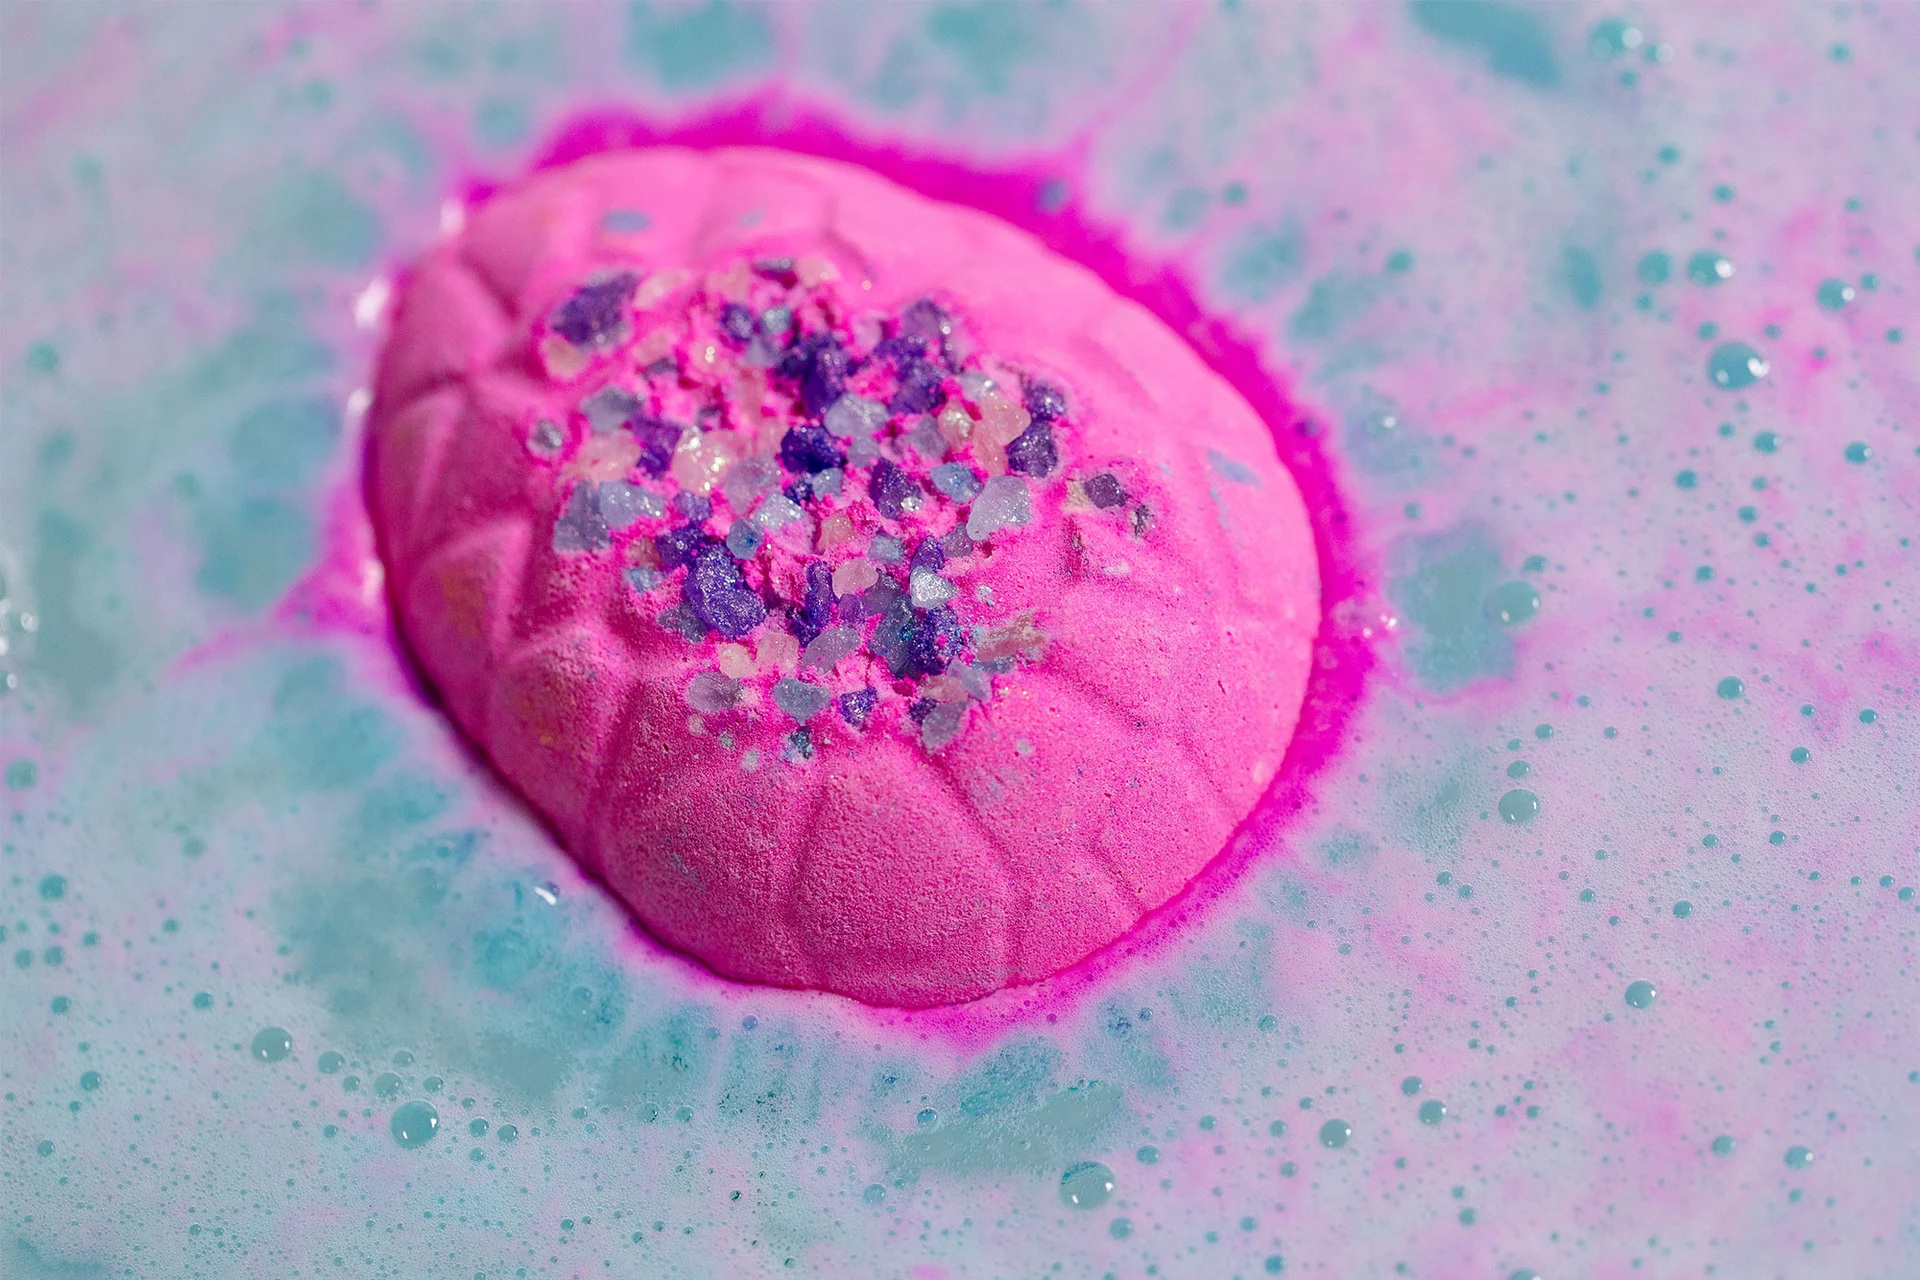 Pink egg bath bomb dissolving in water